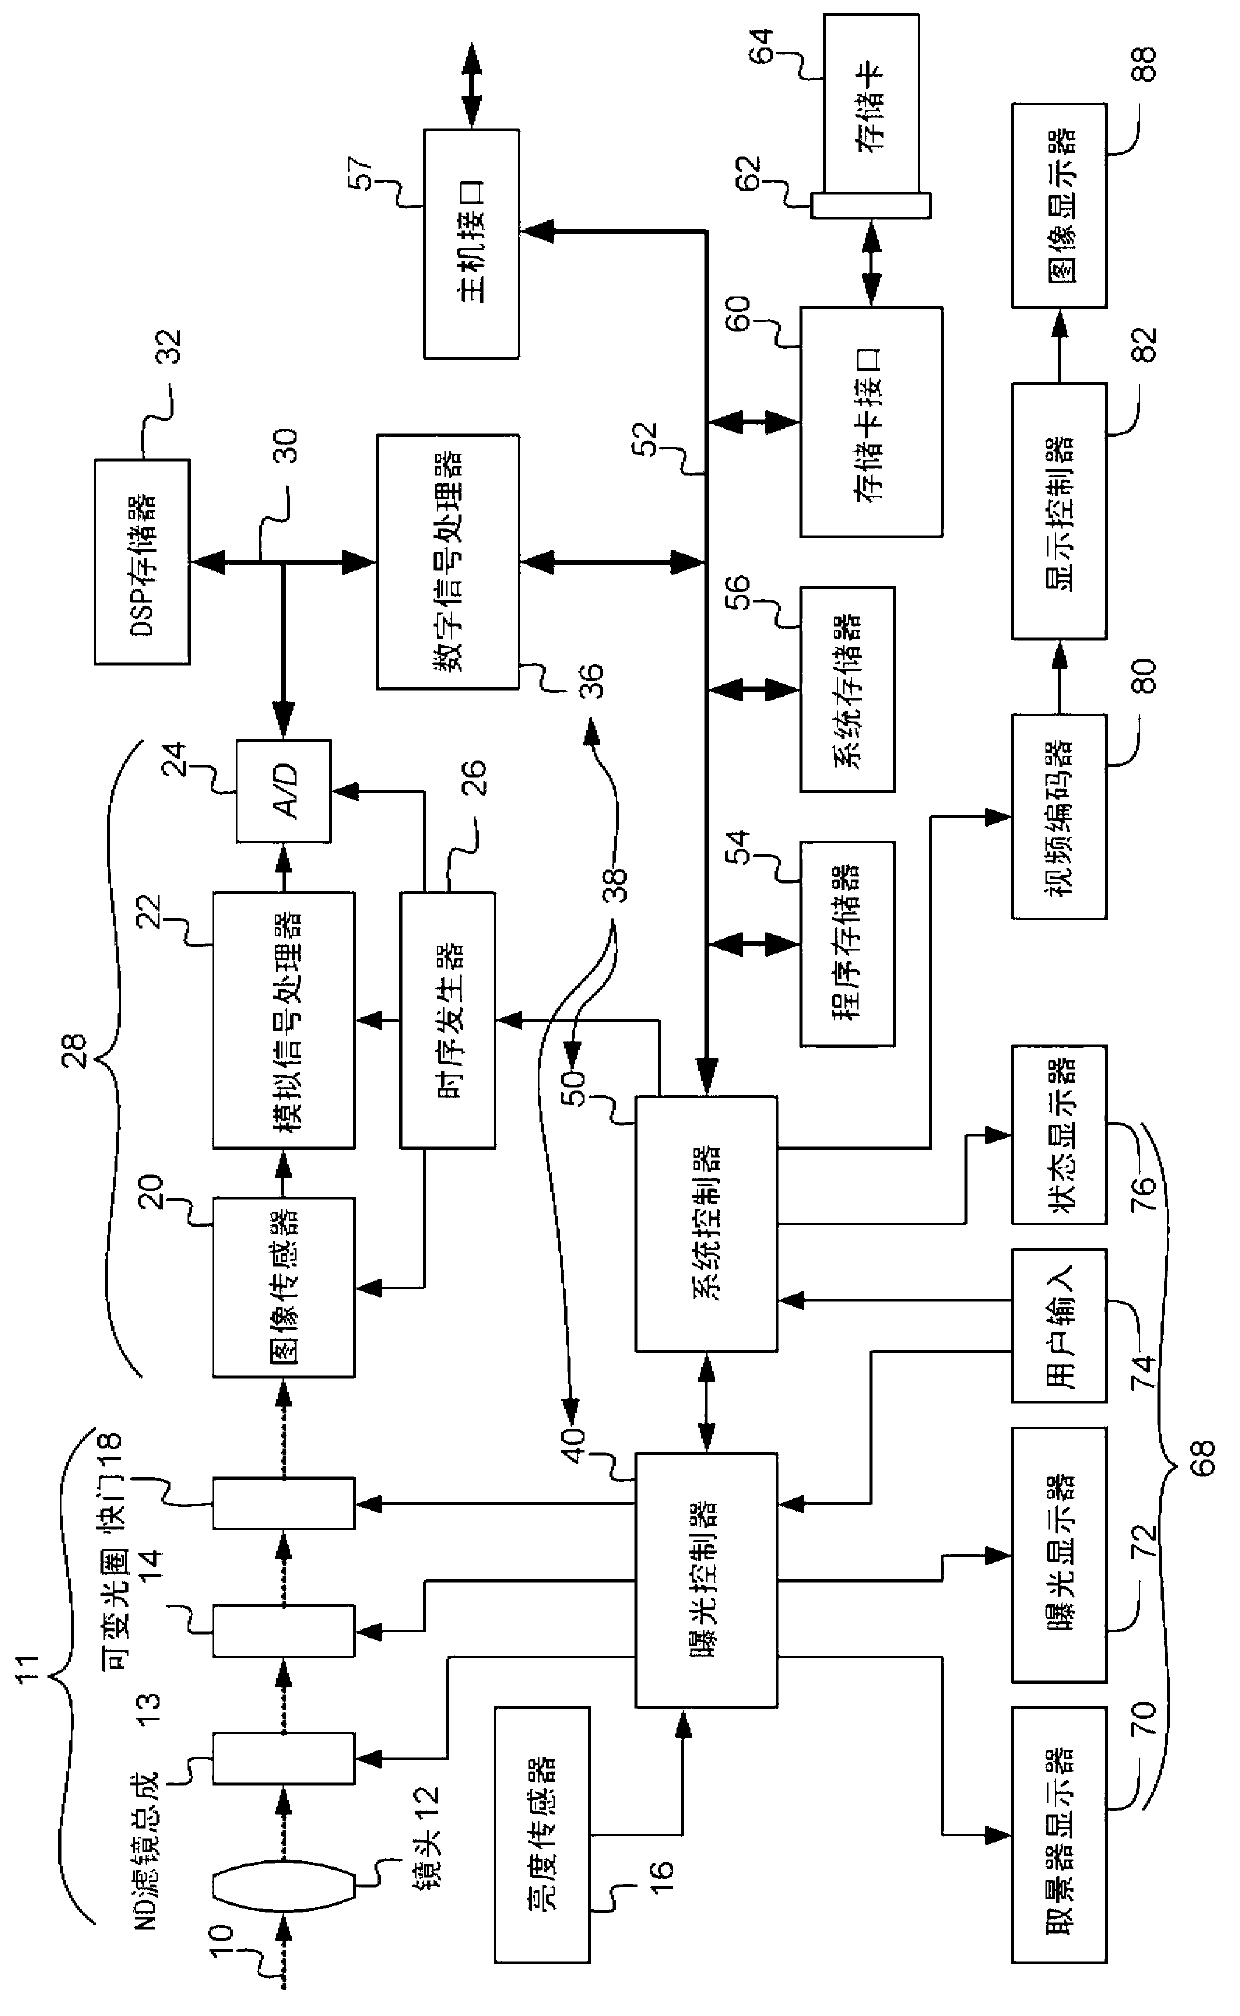 Method and apparatus for providing a high resolution image using low resolution